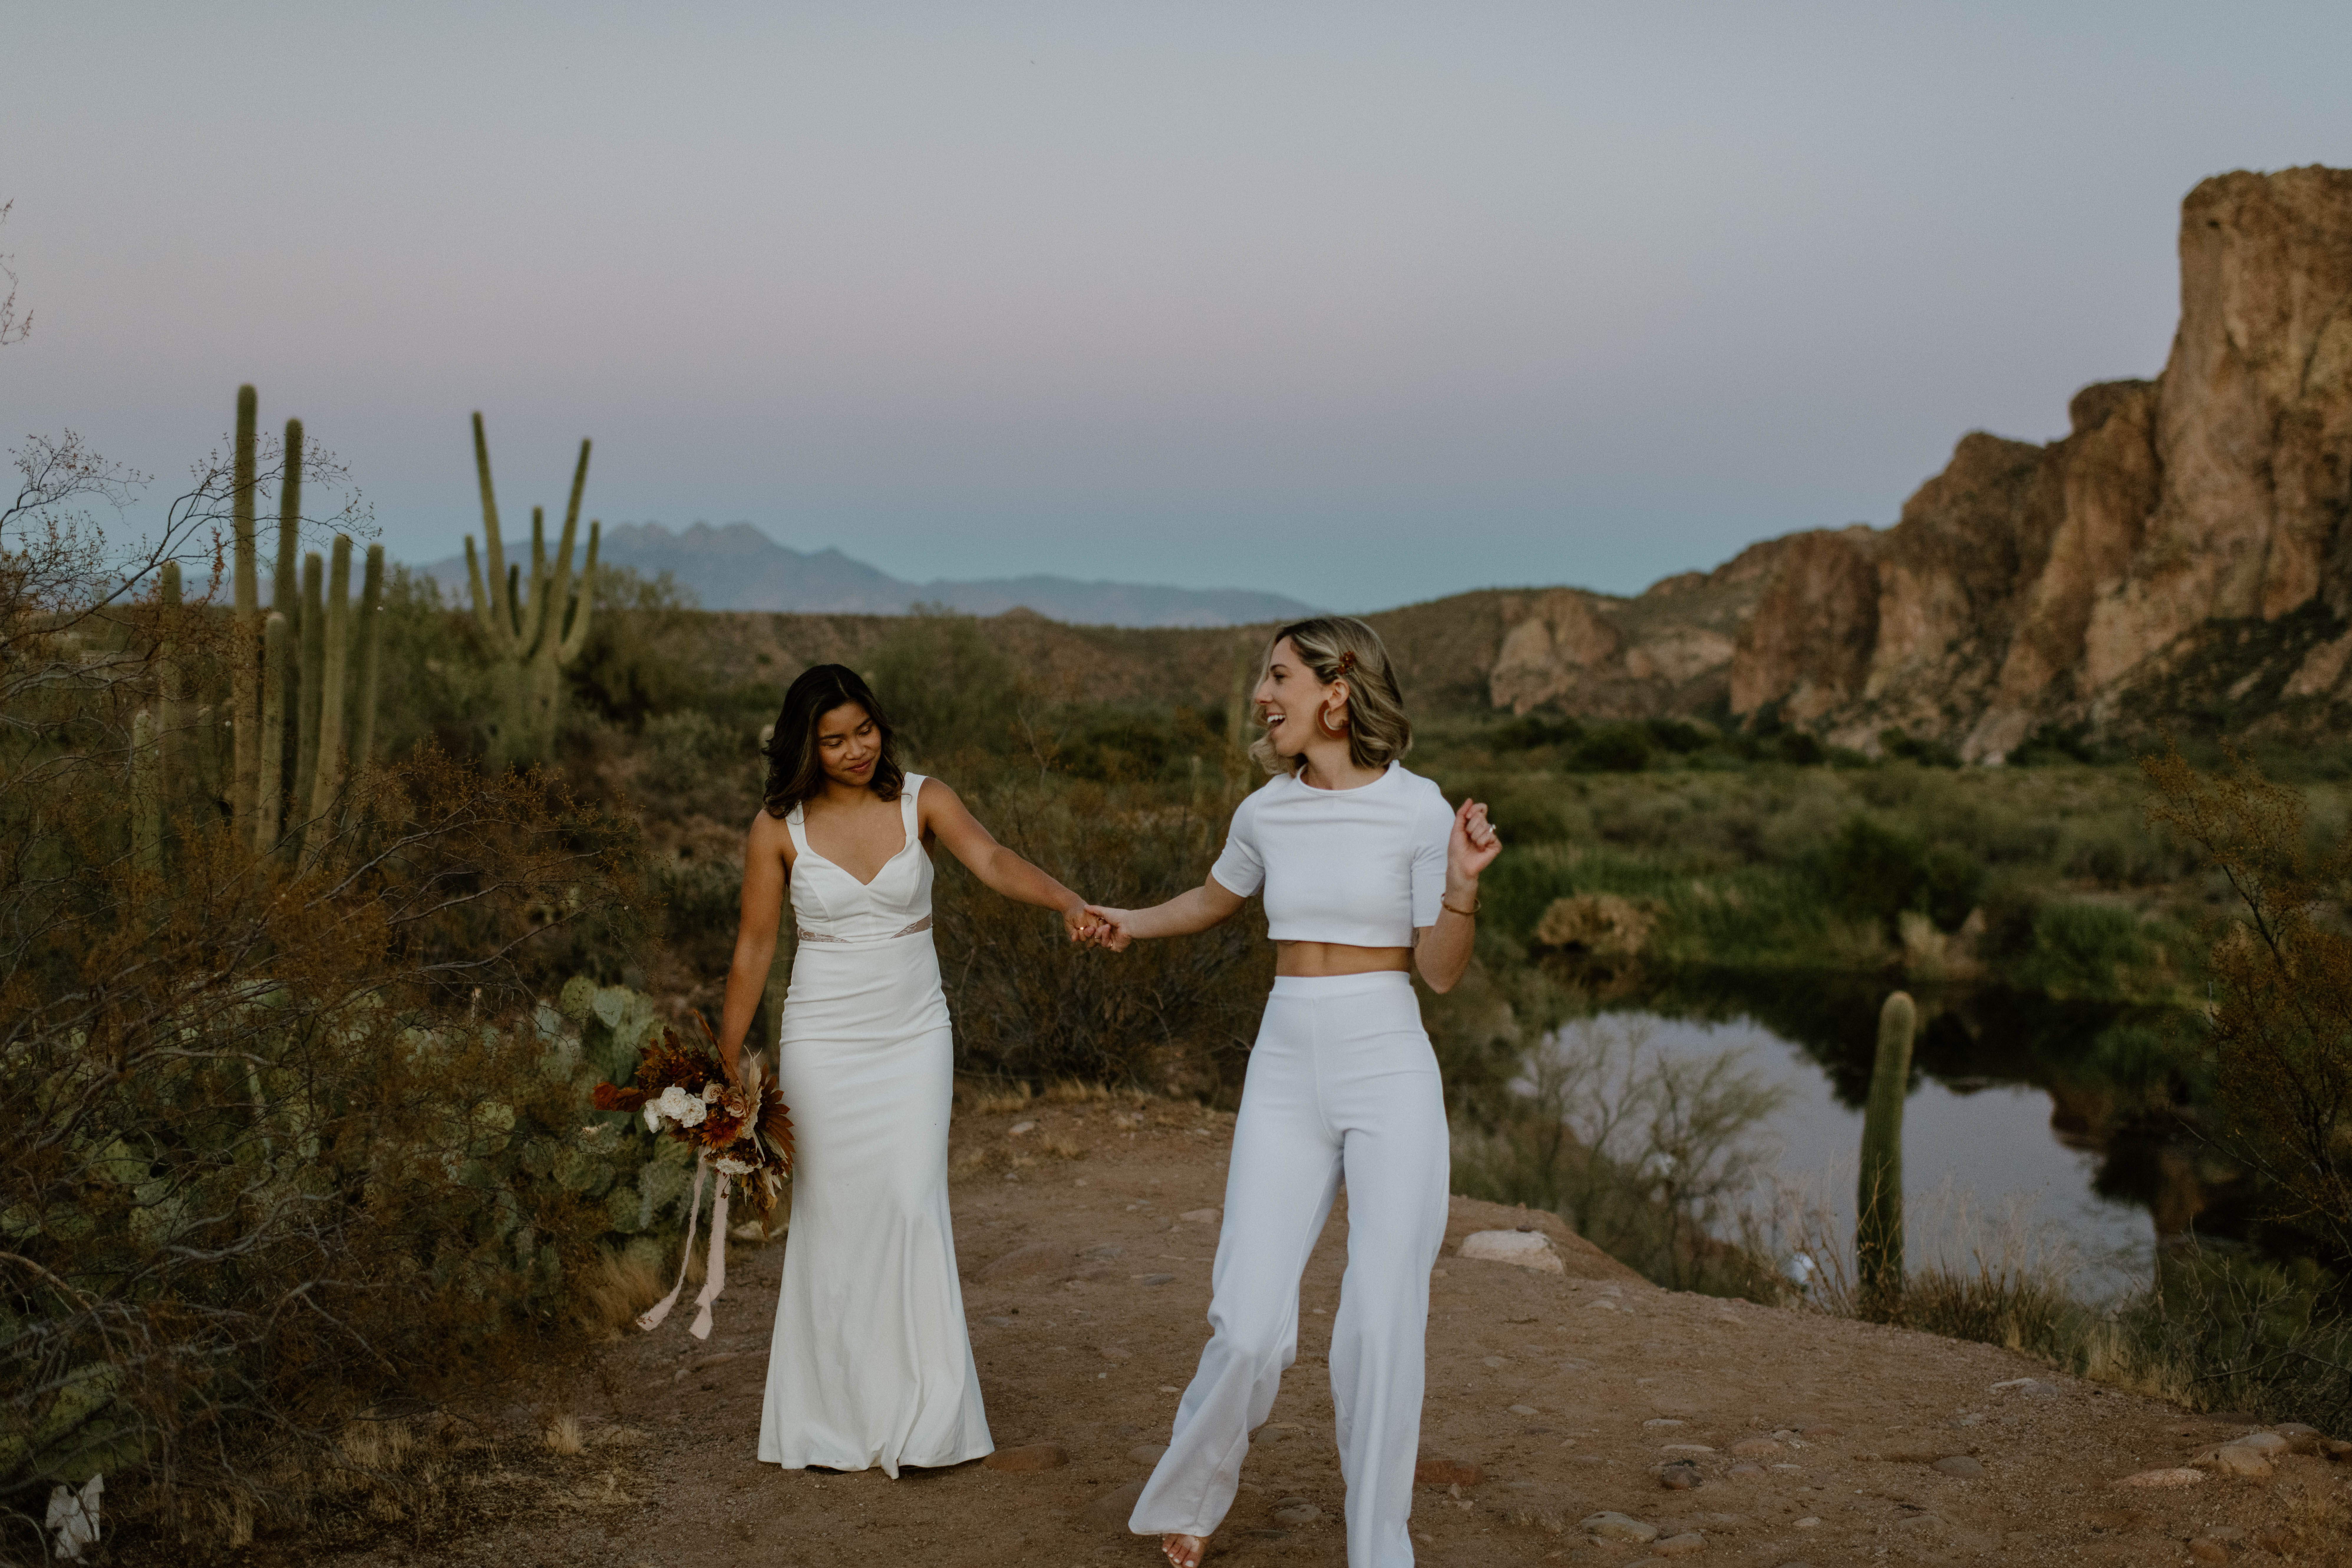 A woman leads her bride through the Arizona desert while celebrating their elopement